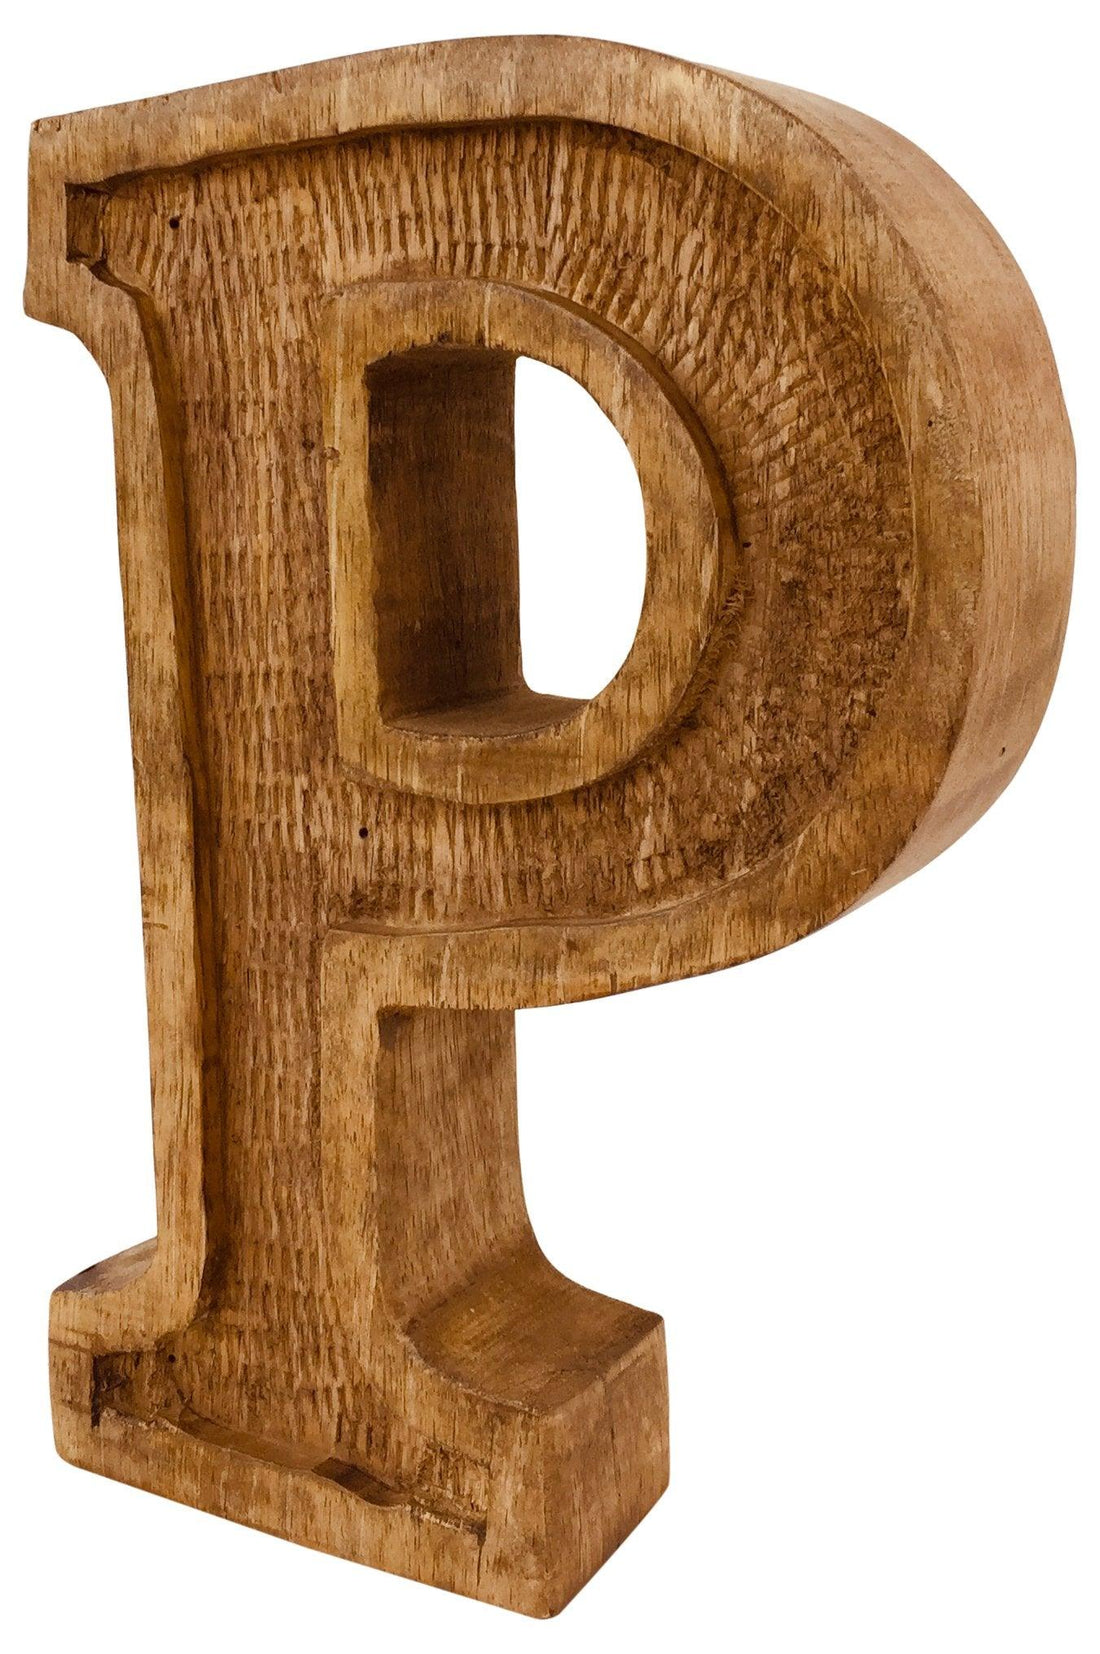 Hand Carved Wooden Embossed Letter P - £18.99 - Single Letters 